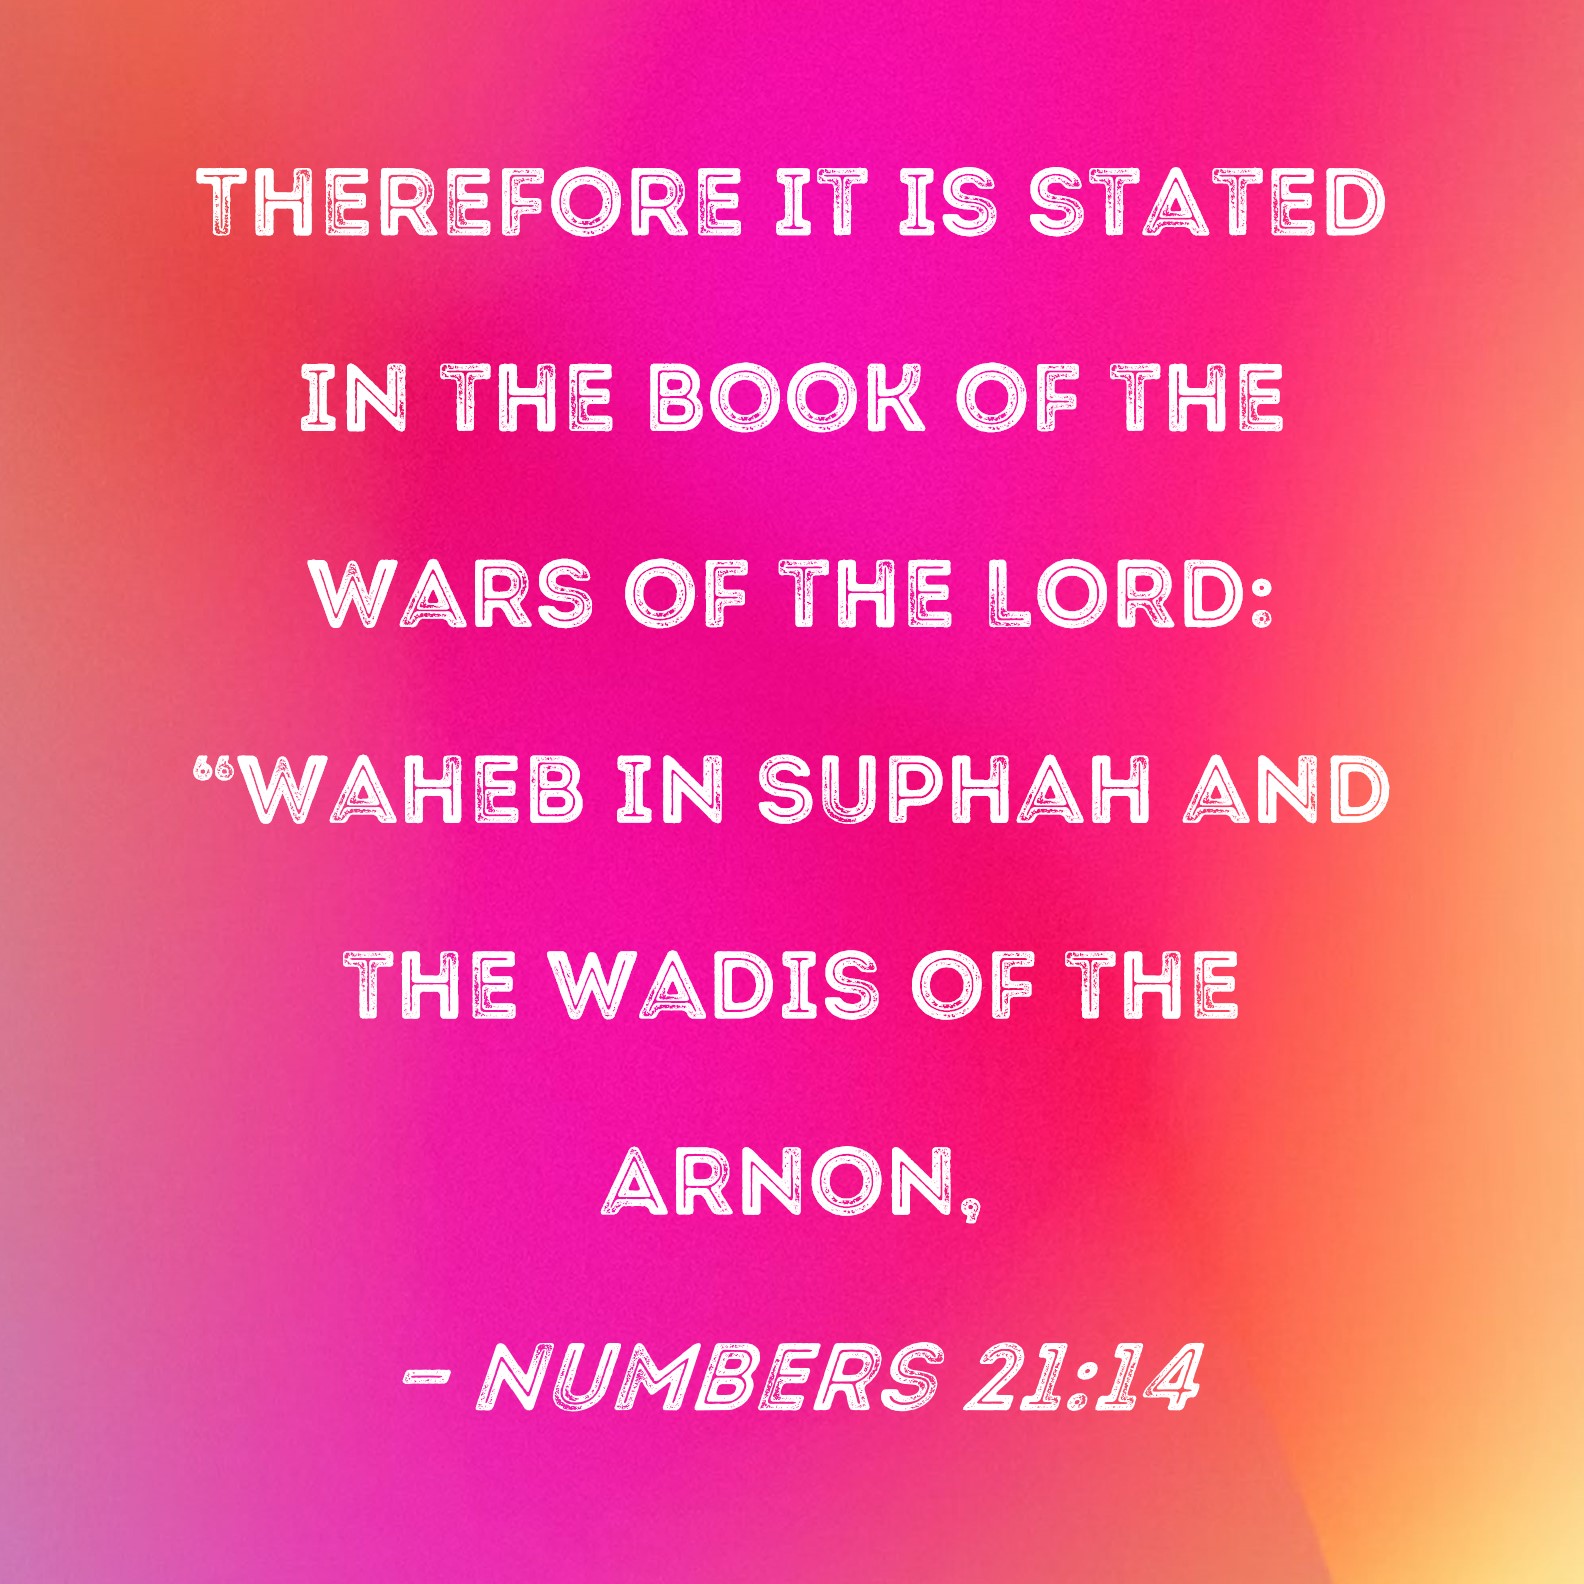 numbers-21-14-therefore-it-is-stated-in-the-book-of-the-wars-of-the-lord-waheb-in-suphah-and